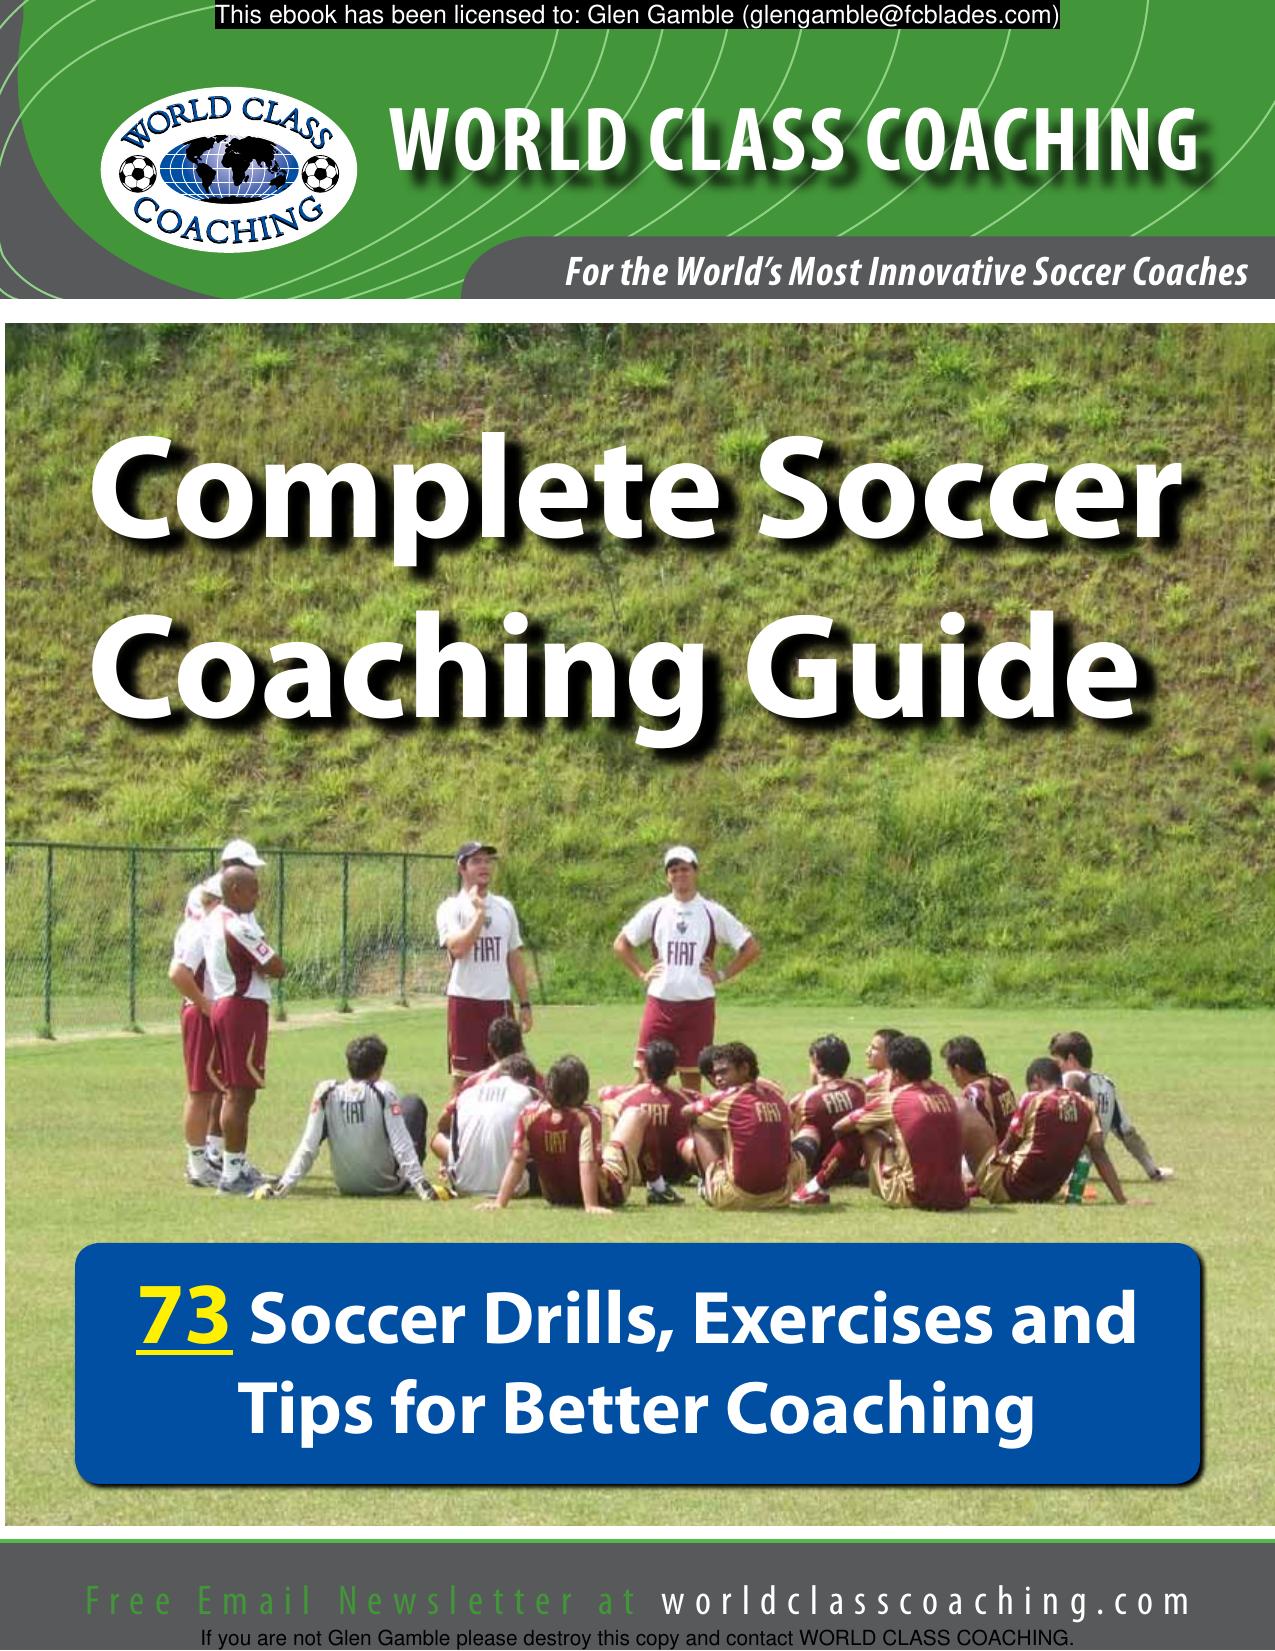 Microsoft Word - 180 Games, Exercises, Drills and Activities from FineSoccer 2011.doc